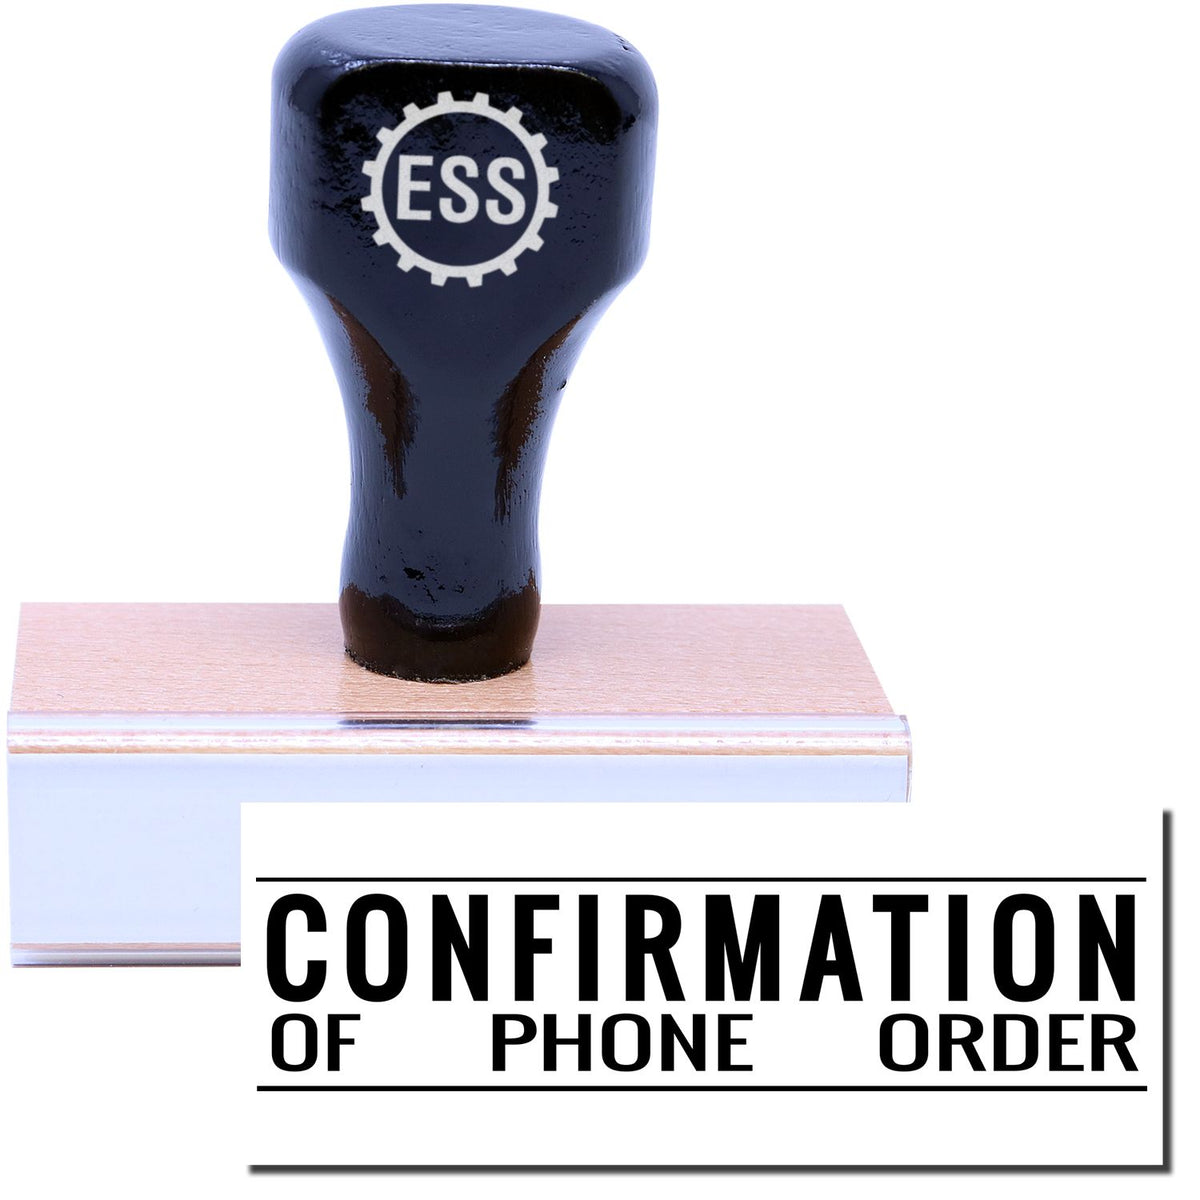 A stock office rubber stamp with a stamped image showing how the text &quot;CONFIRMATION OF PHONE ORDER&quot; is displayed after stamping.